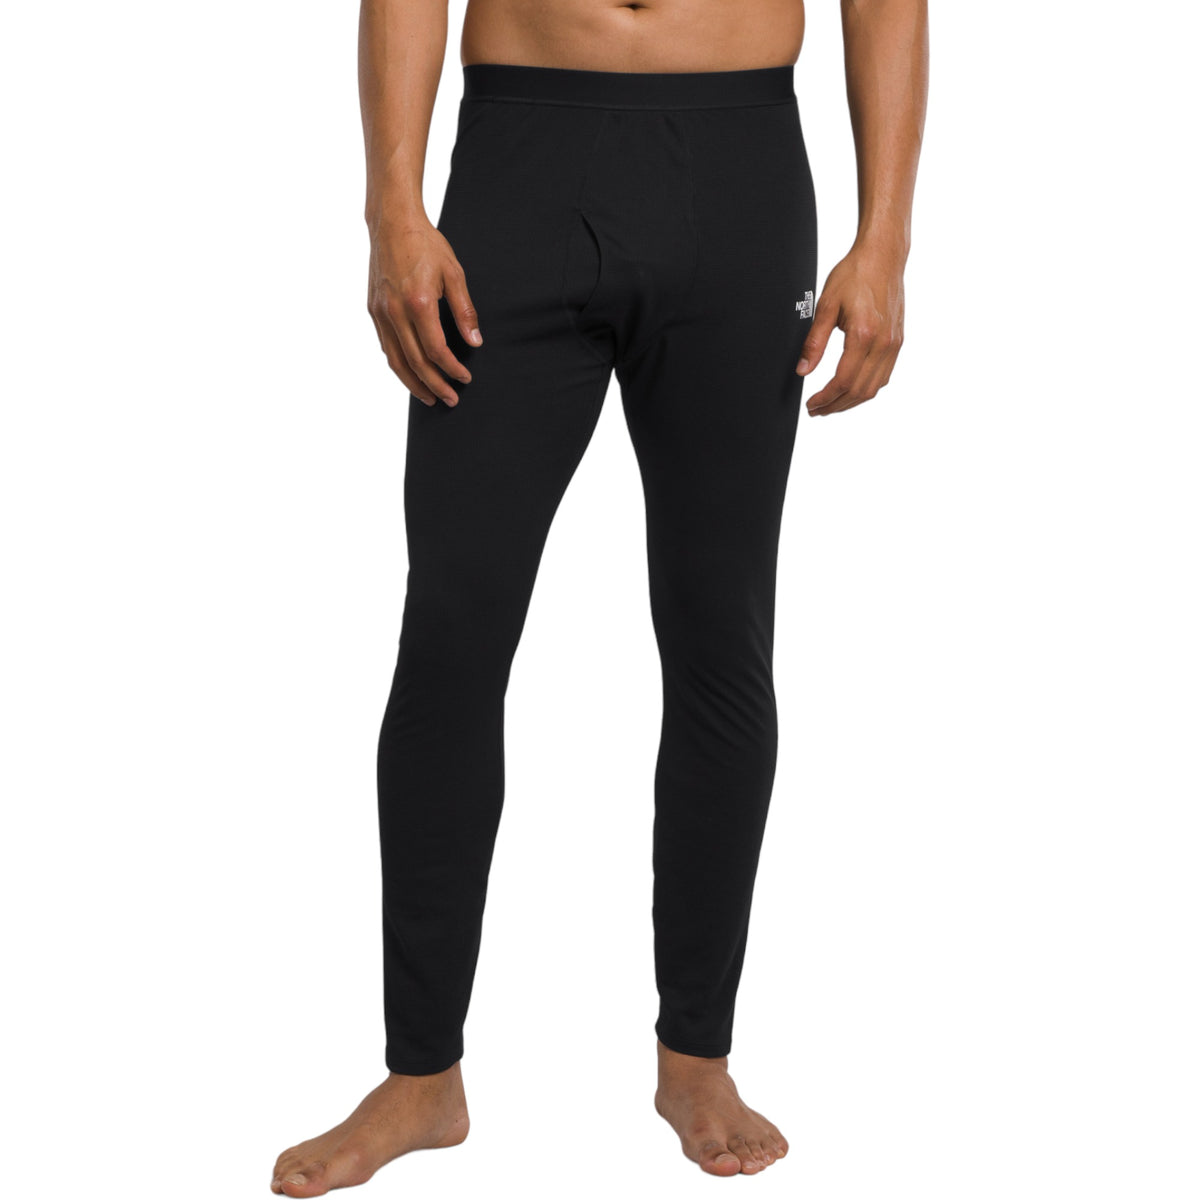 The North Face Singapore - Men's Expedition Tights Keep your lower